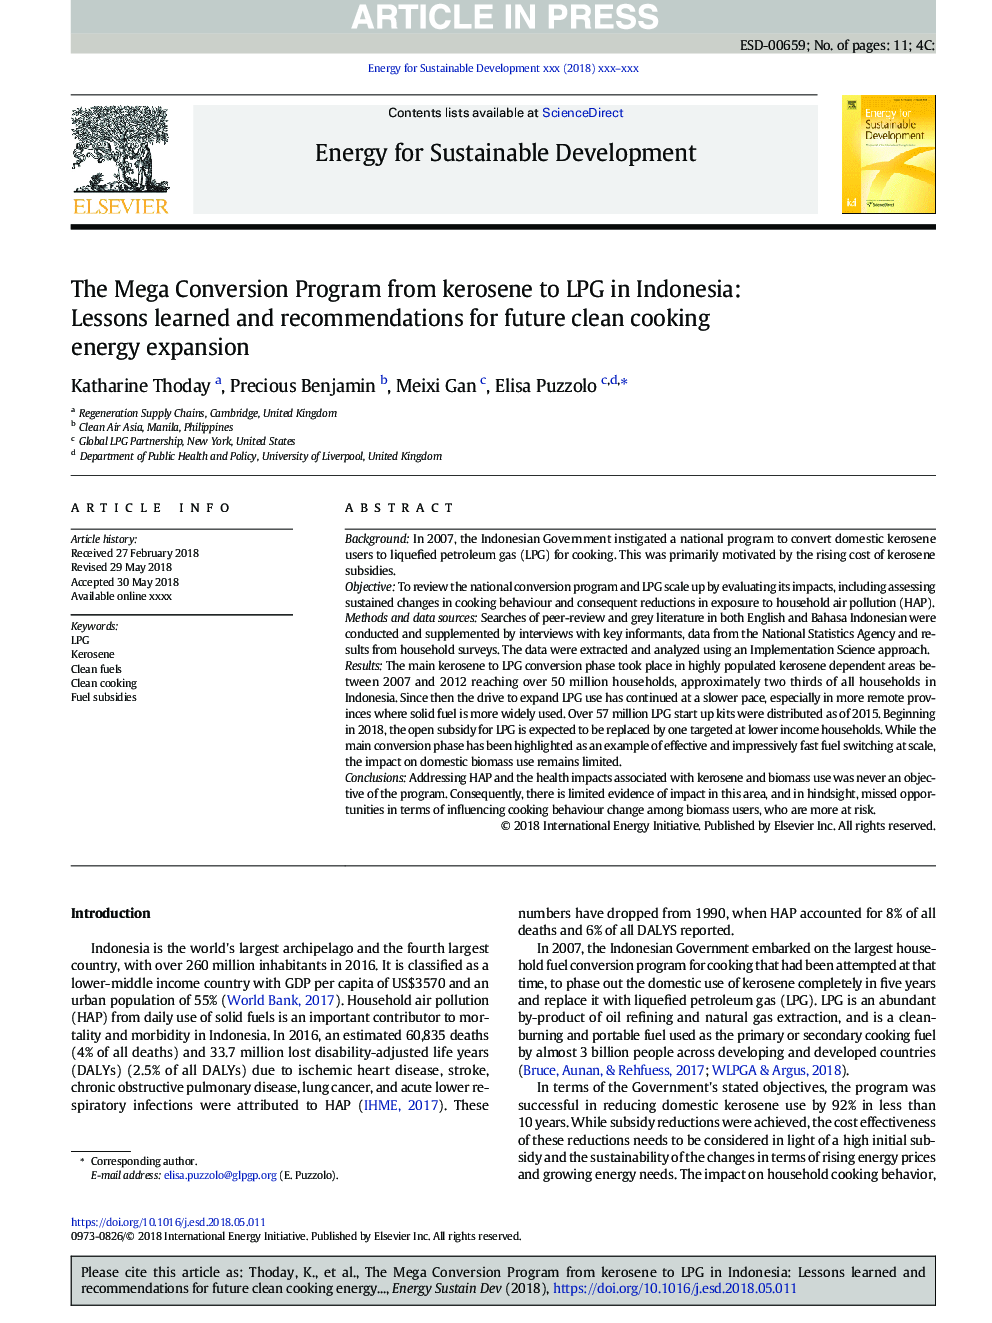 The Mega Conversion Program from kerosene to LPG in Indonesia: Lessons learned and recommendations for future clean cooking energy expansion